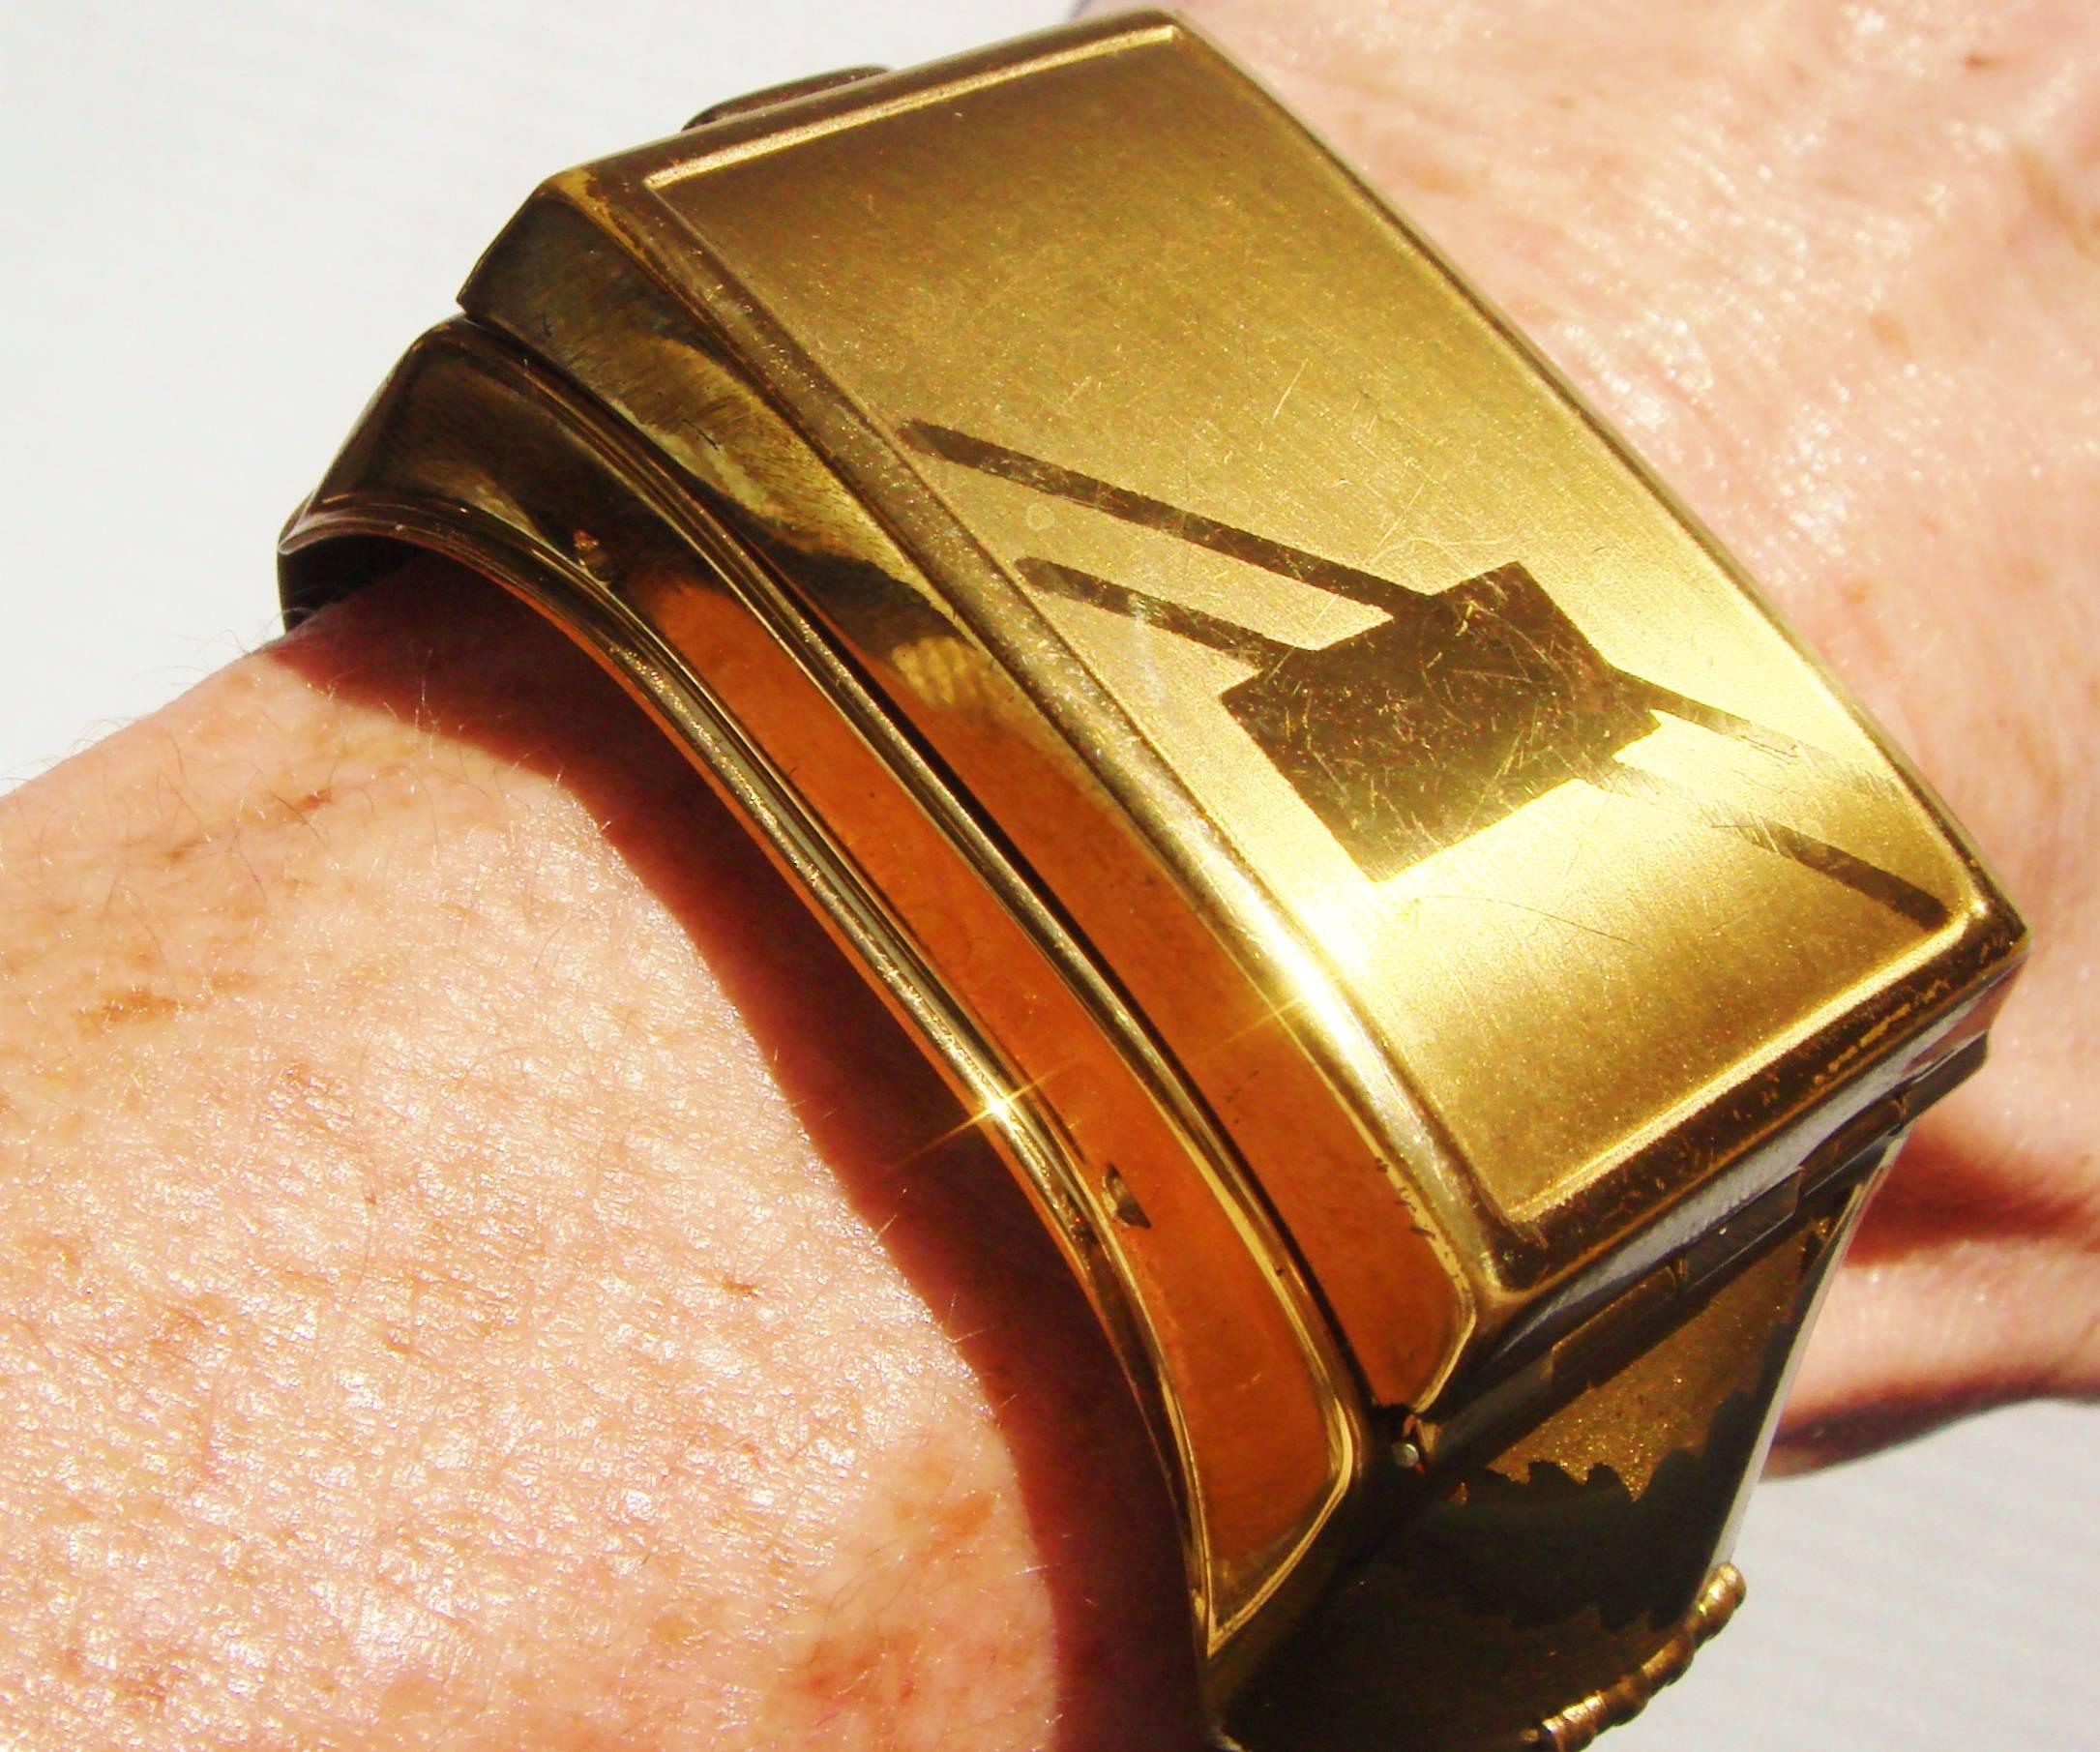 This very stylish and rare American Art Deco wrist compact clamper bracelet was manufactured by famed compact makers Kotler and Kopit Incorporated of Pawtucket, Rhode Island. It features a geometric faceplate with an unused monogram plaque. The